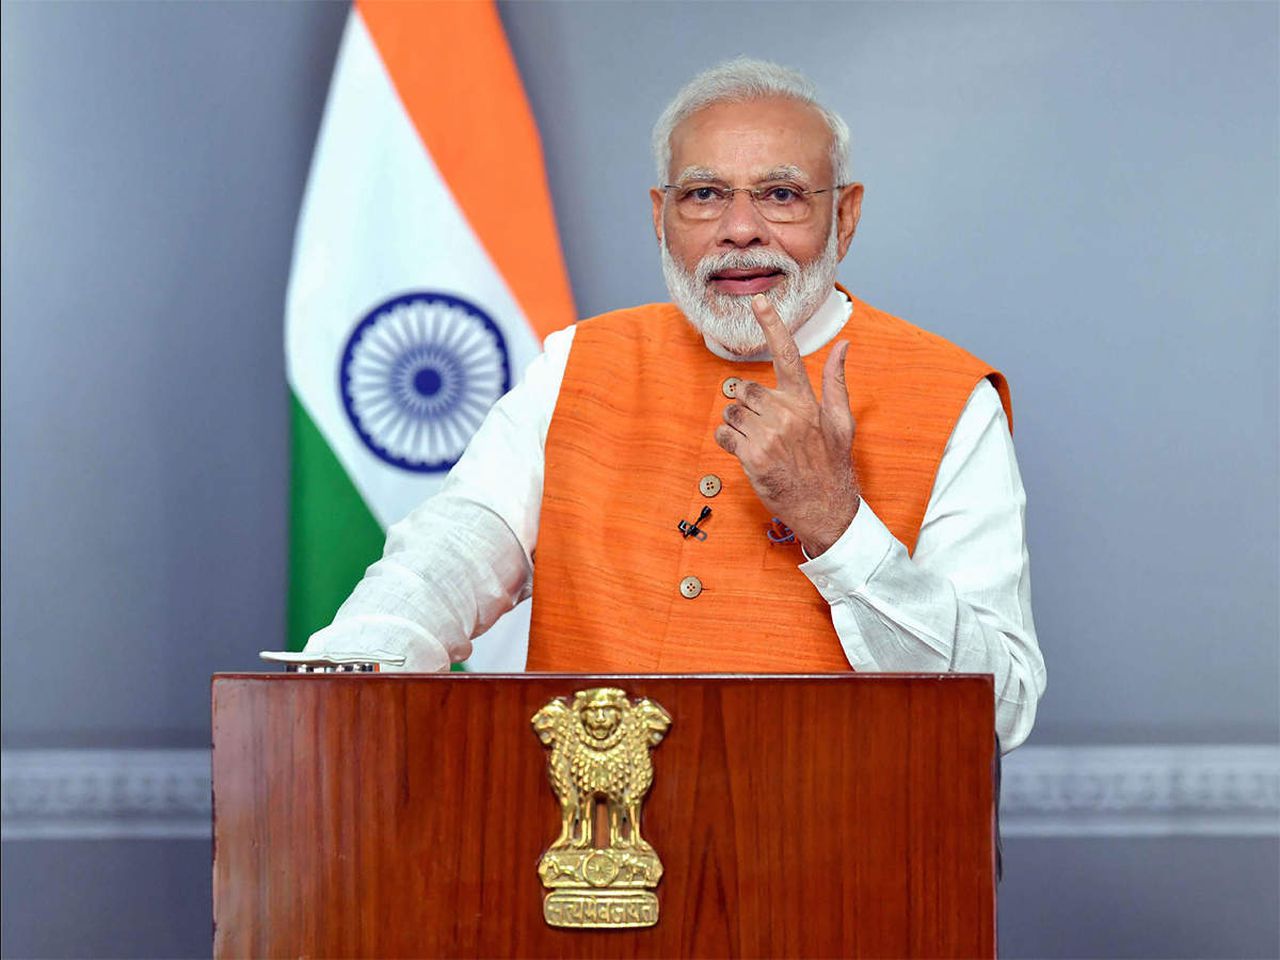 Indian Prime Minister asked 1.3 billion people to stay at home, Image via Economic Times